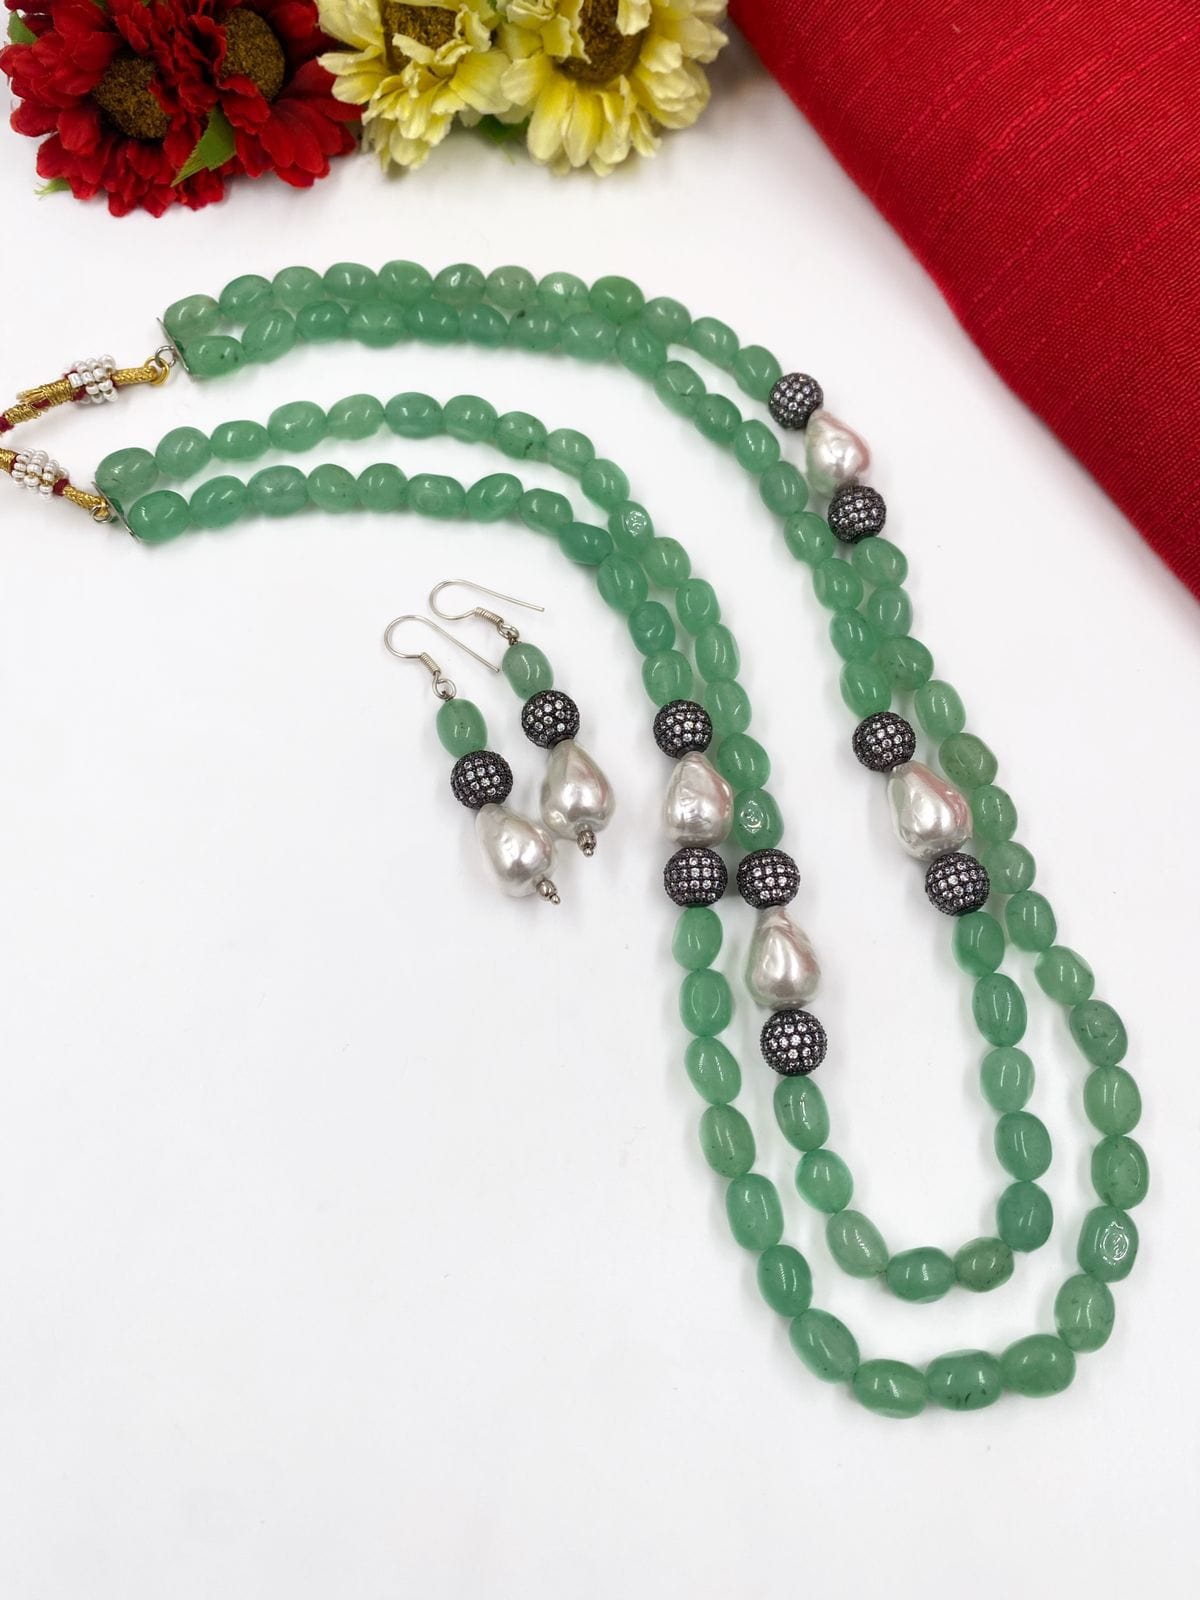 Fancy Mint Green Jade Beads Necklace With Pearls For Women By Gehna Shop Beads Jewellery